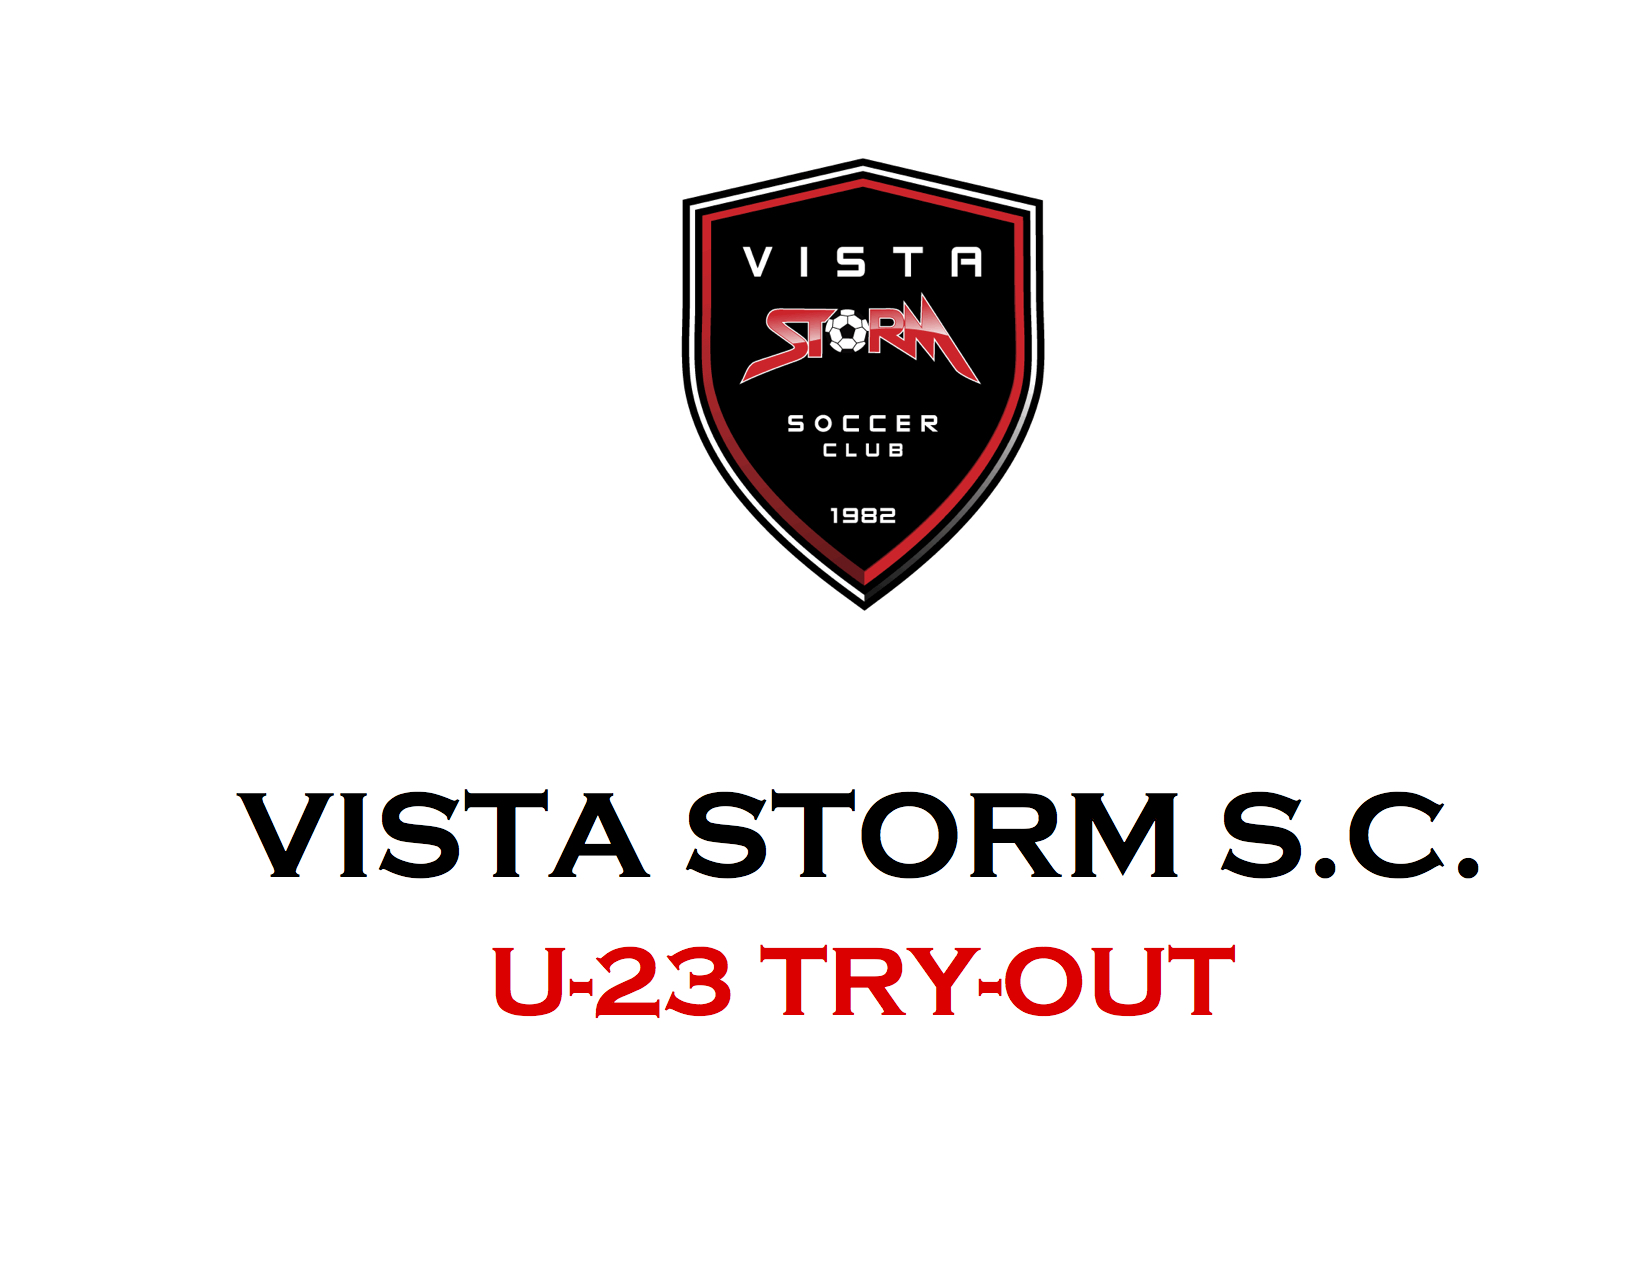 STORM U-23 TRY-OUTS